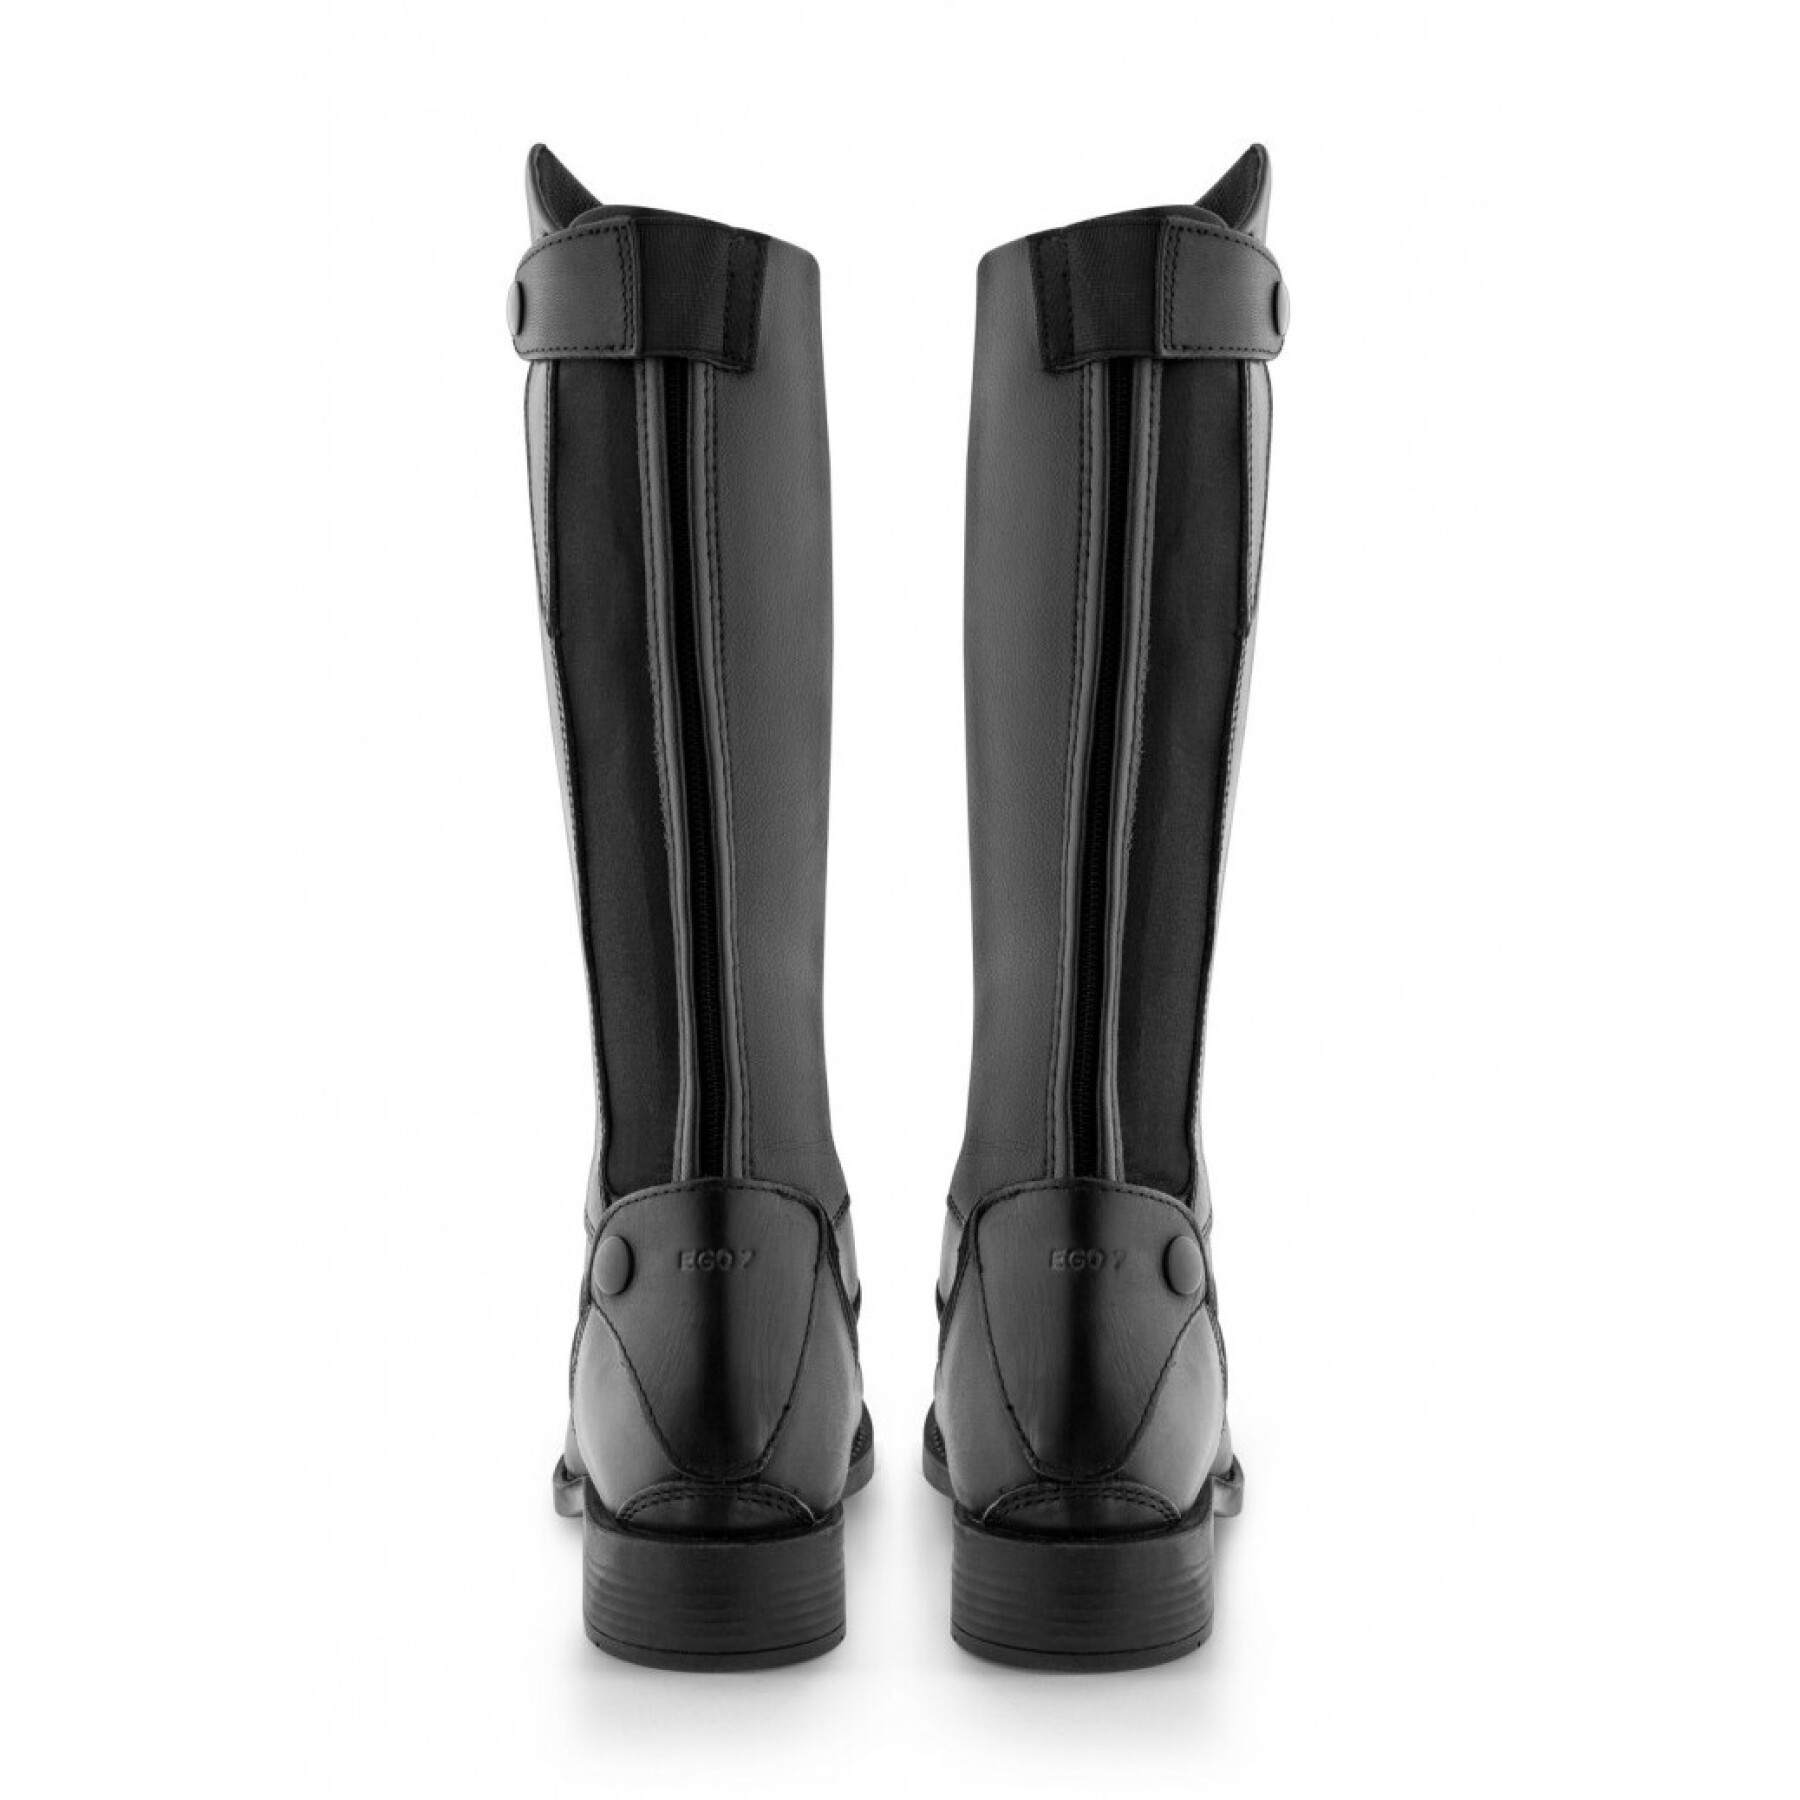 Riding boots for children Ego 7 Delphi